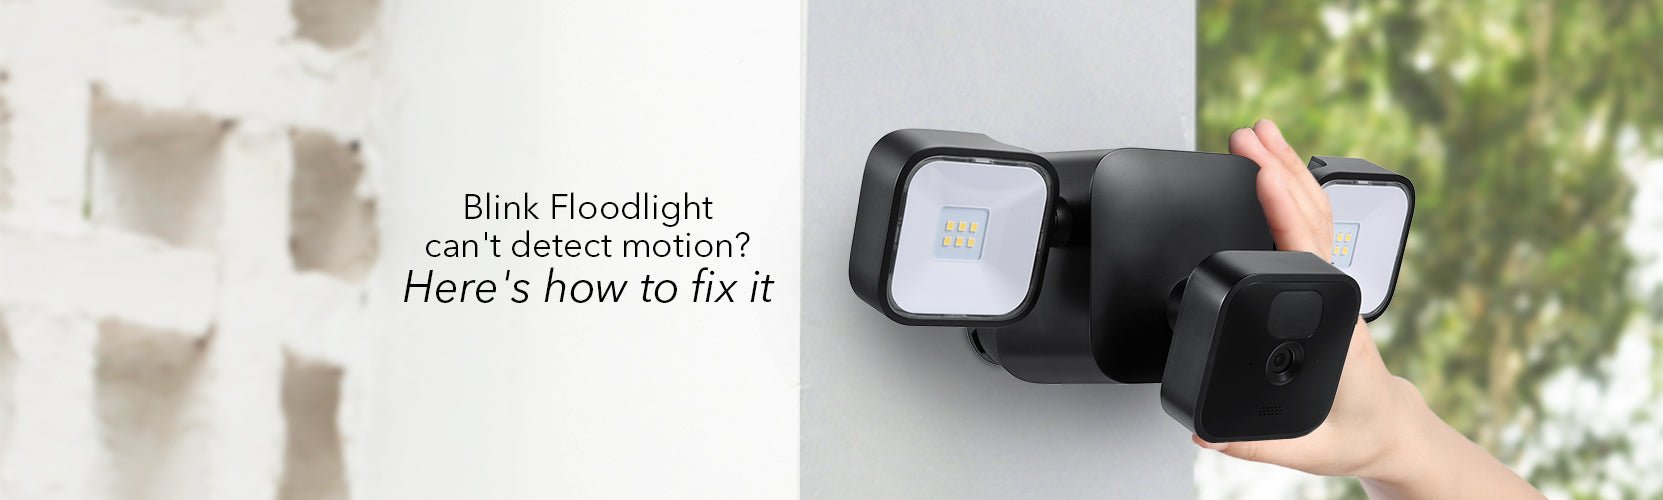 Blink Floodlight can't detect motion? Here's how to fix it